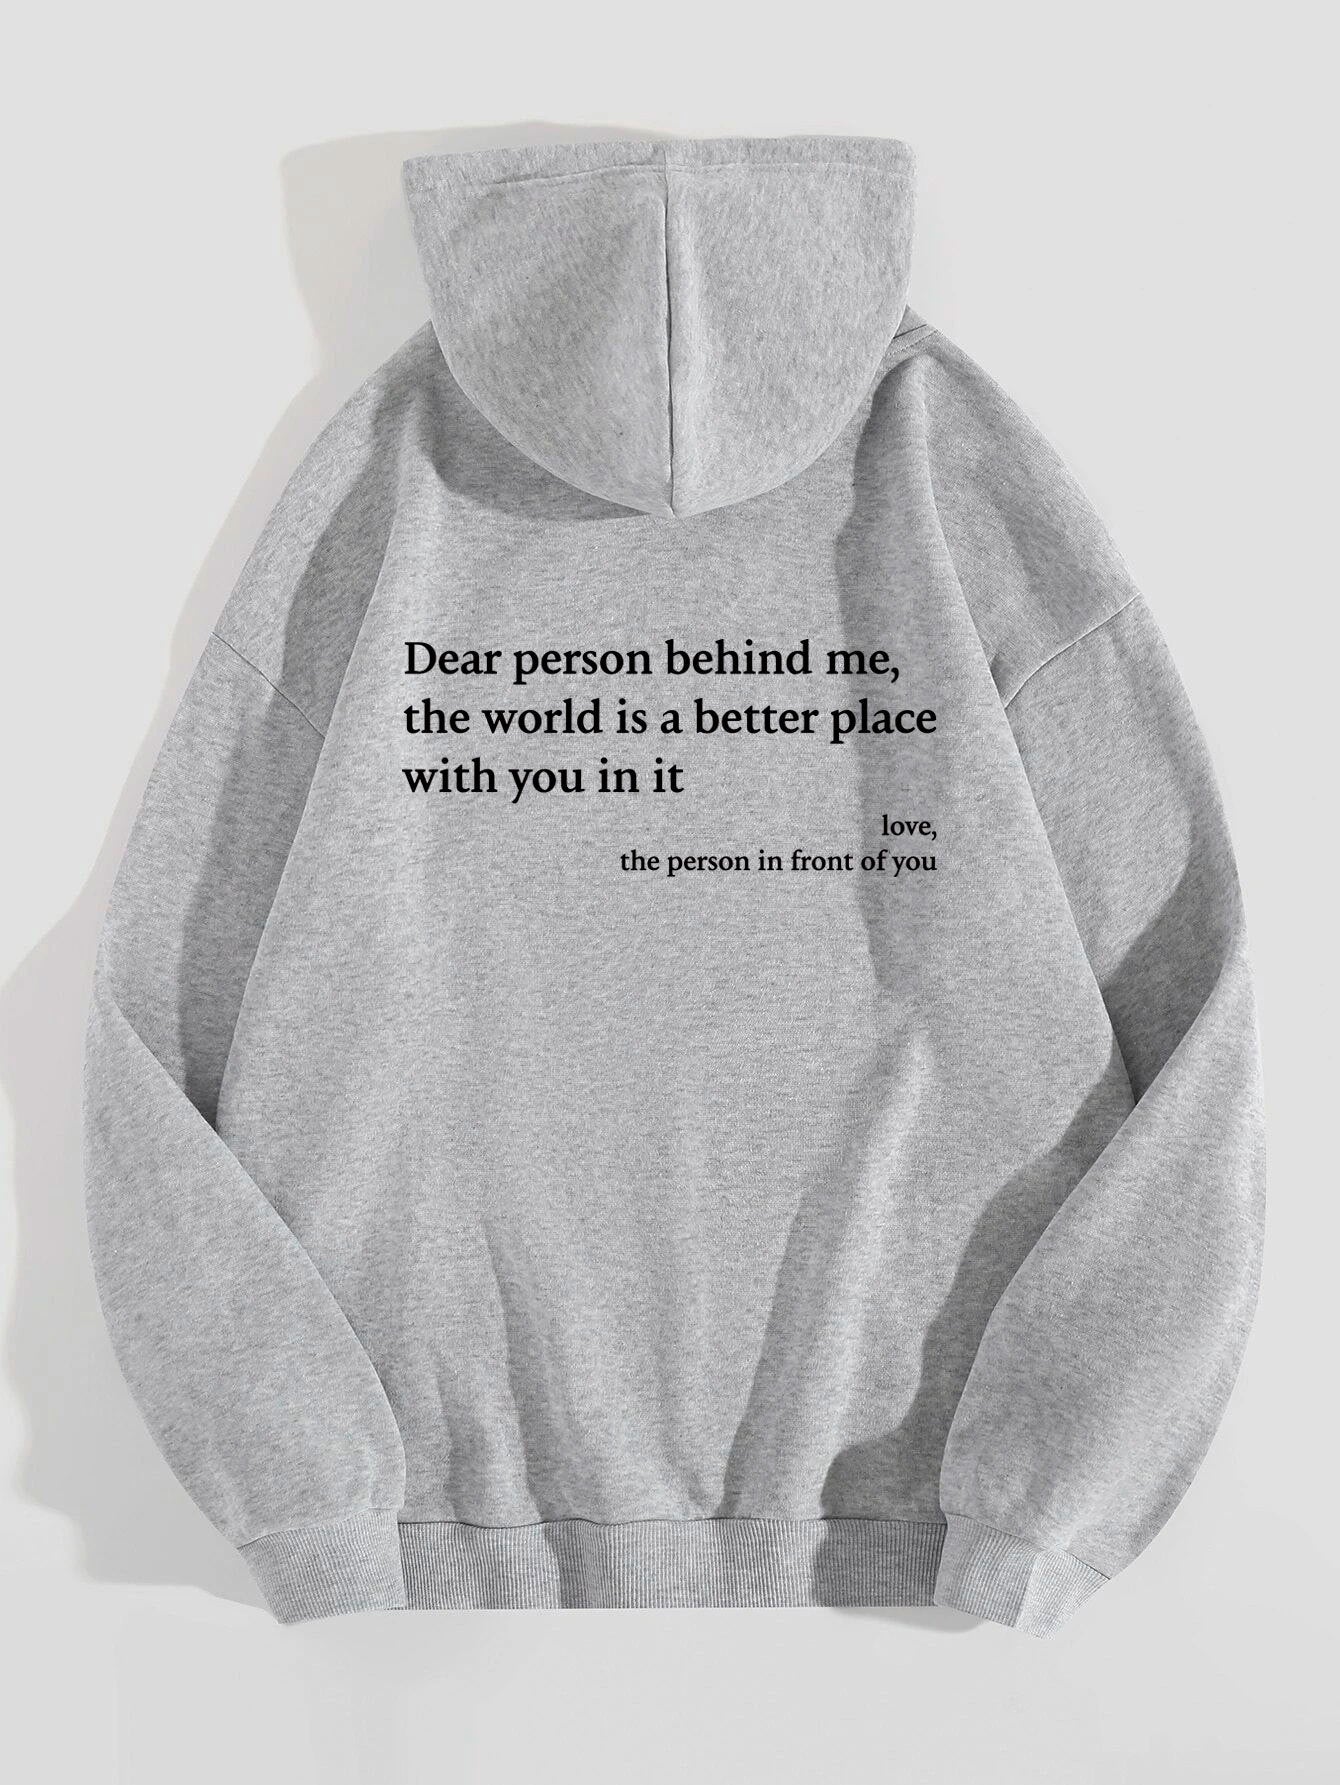 dear-person-behind-me-the-world-is-a-better-place-with-you-in-it-love-the-person-in-front-of-you-womens-plush-letter-printed-kangaroo-pocket-drawstring-printed-hoodie-unisex-trendy-hoodies